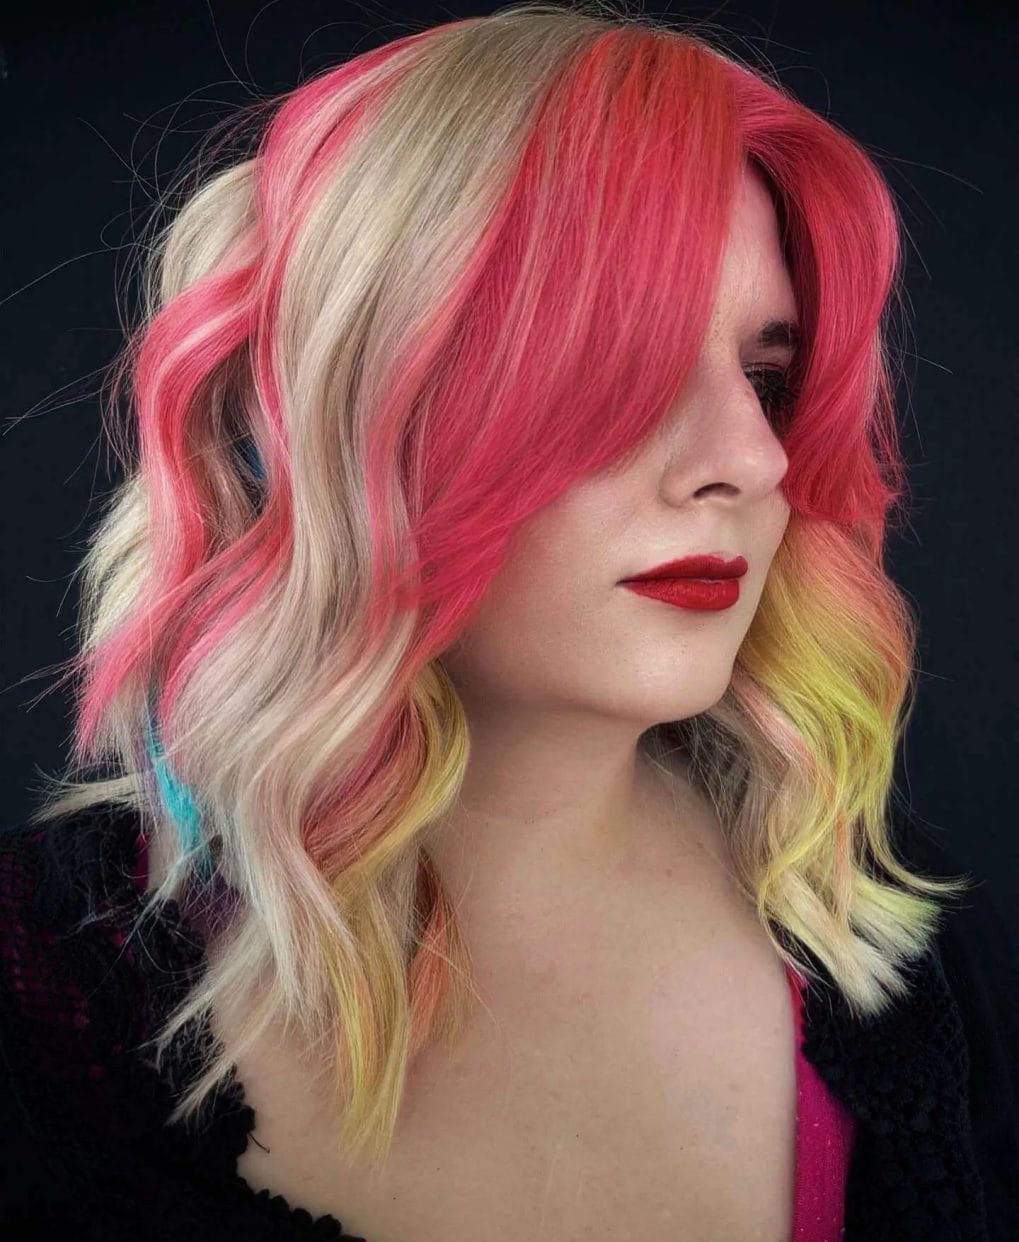 Vibrant hot pink crown melting into sandy blonde with turquoise and yellow accents.